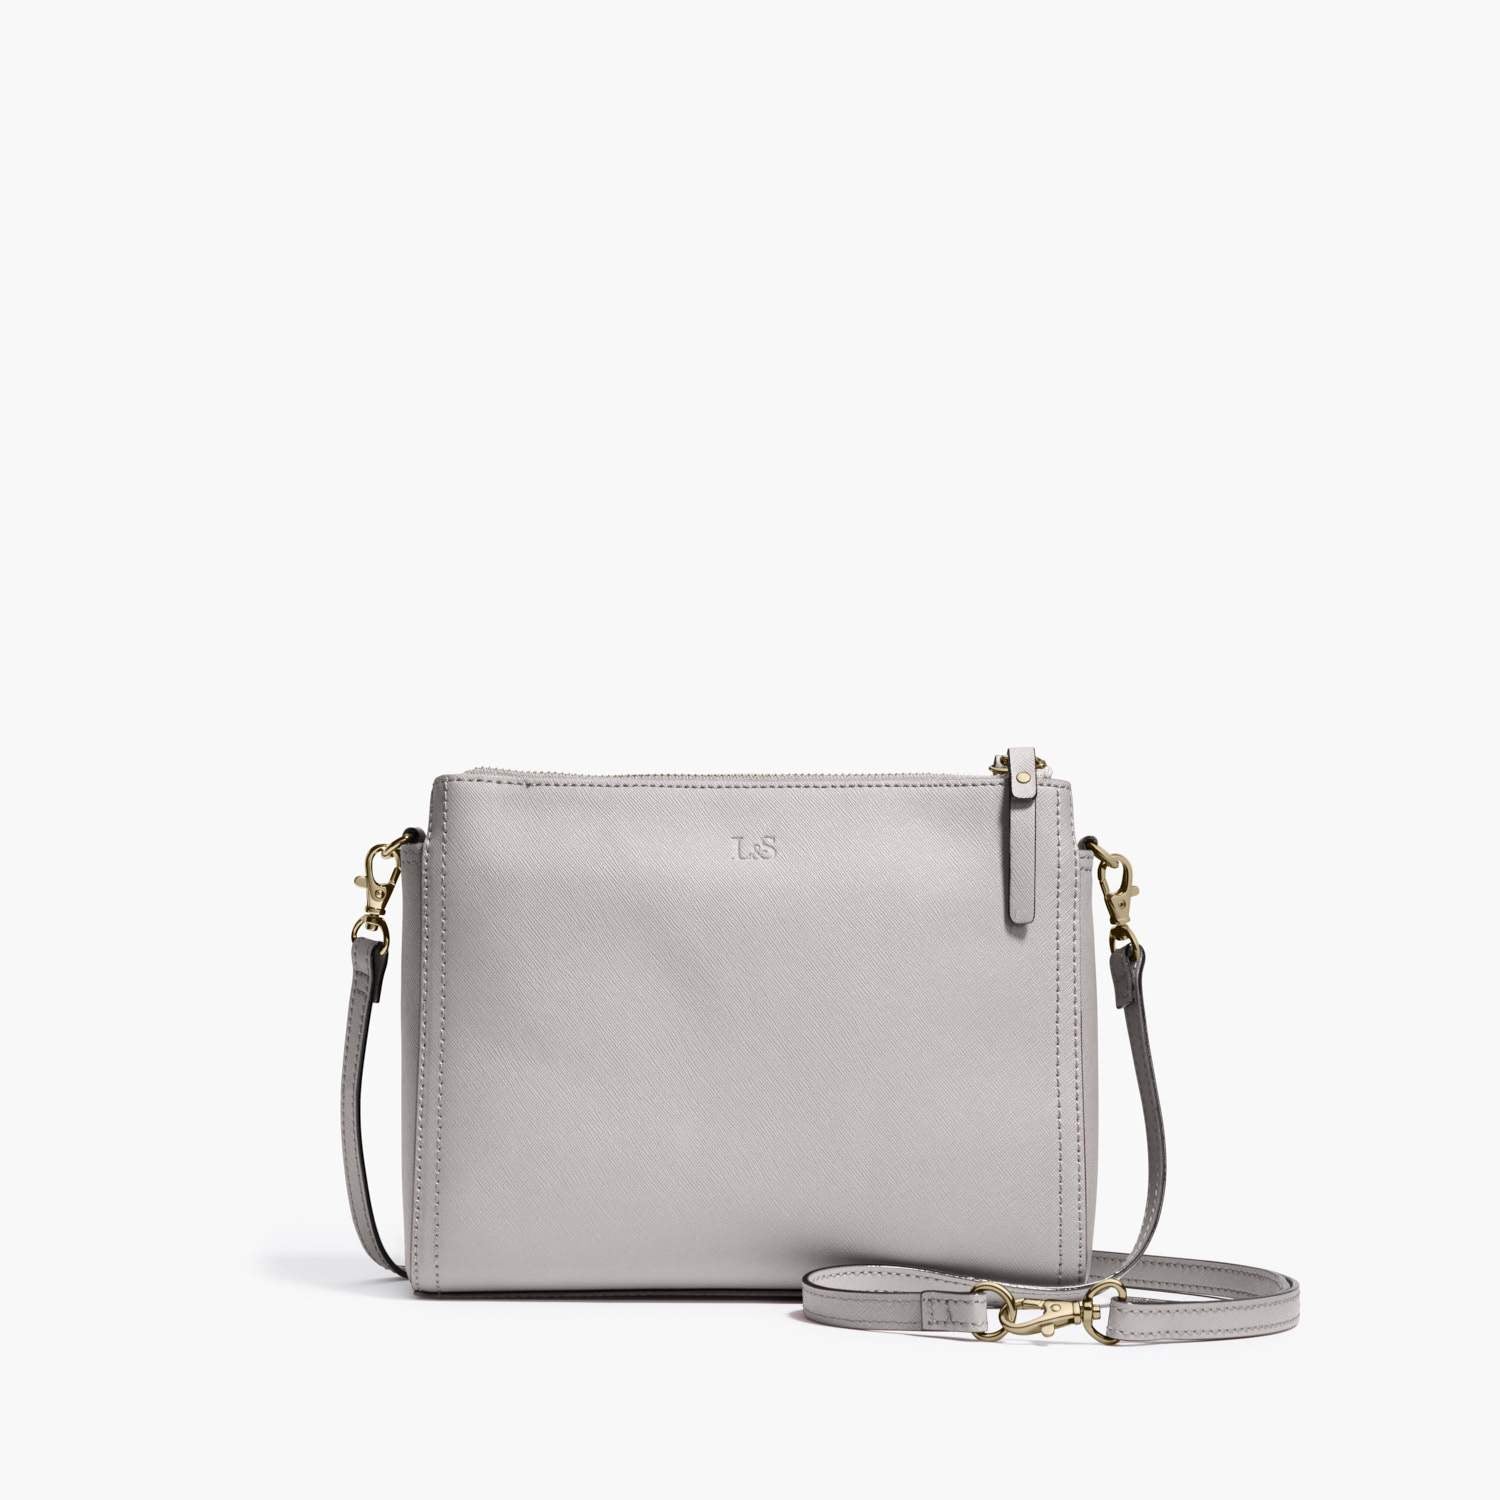 Lo & Sons: The Pearl - Women's Crossbody Bag in Light Grey Saffiano Leather